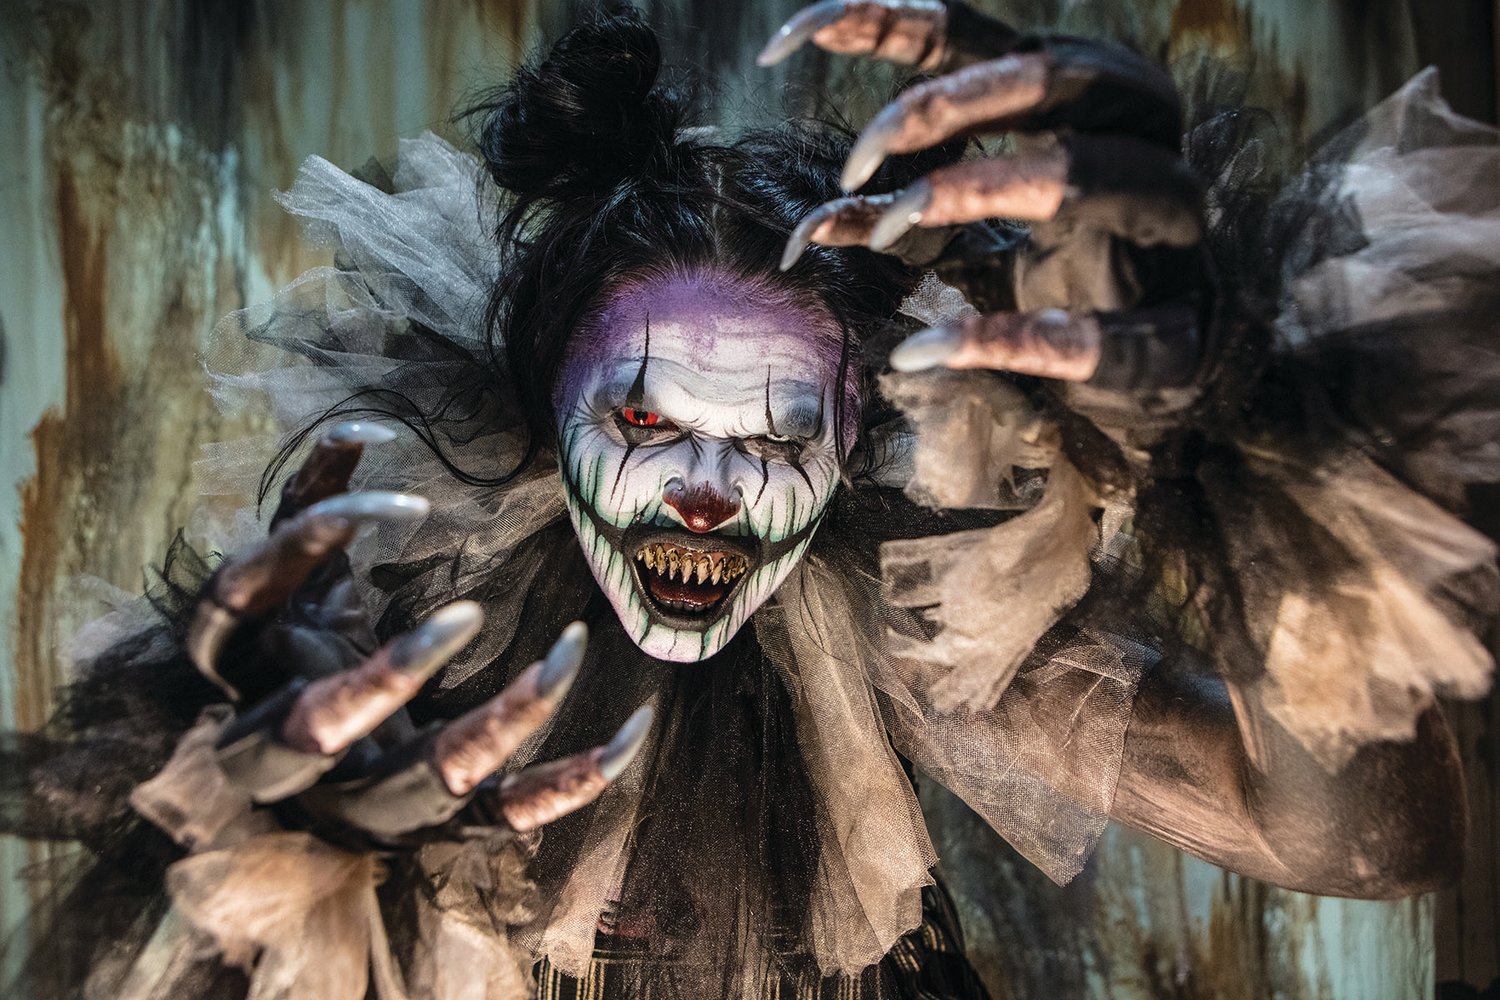 Fright Nights will take place at the South Florida Fairgrounds, 9067 Southern Blvd. in West Palm Beach on October 8-9,14-16, 21-23, 28-30.